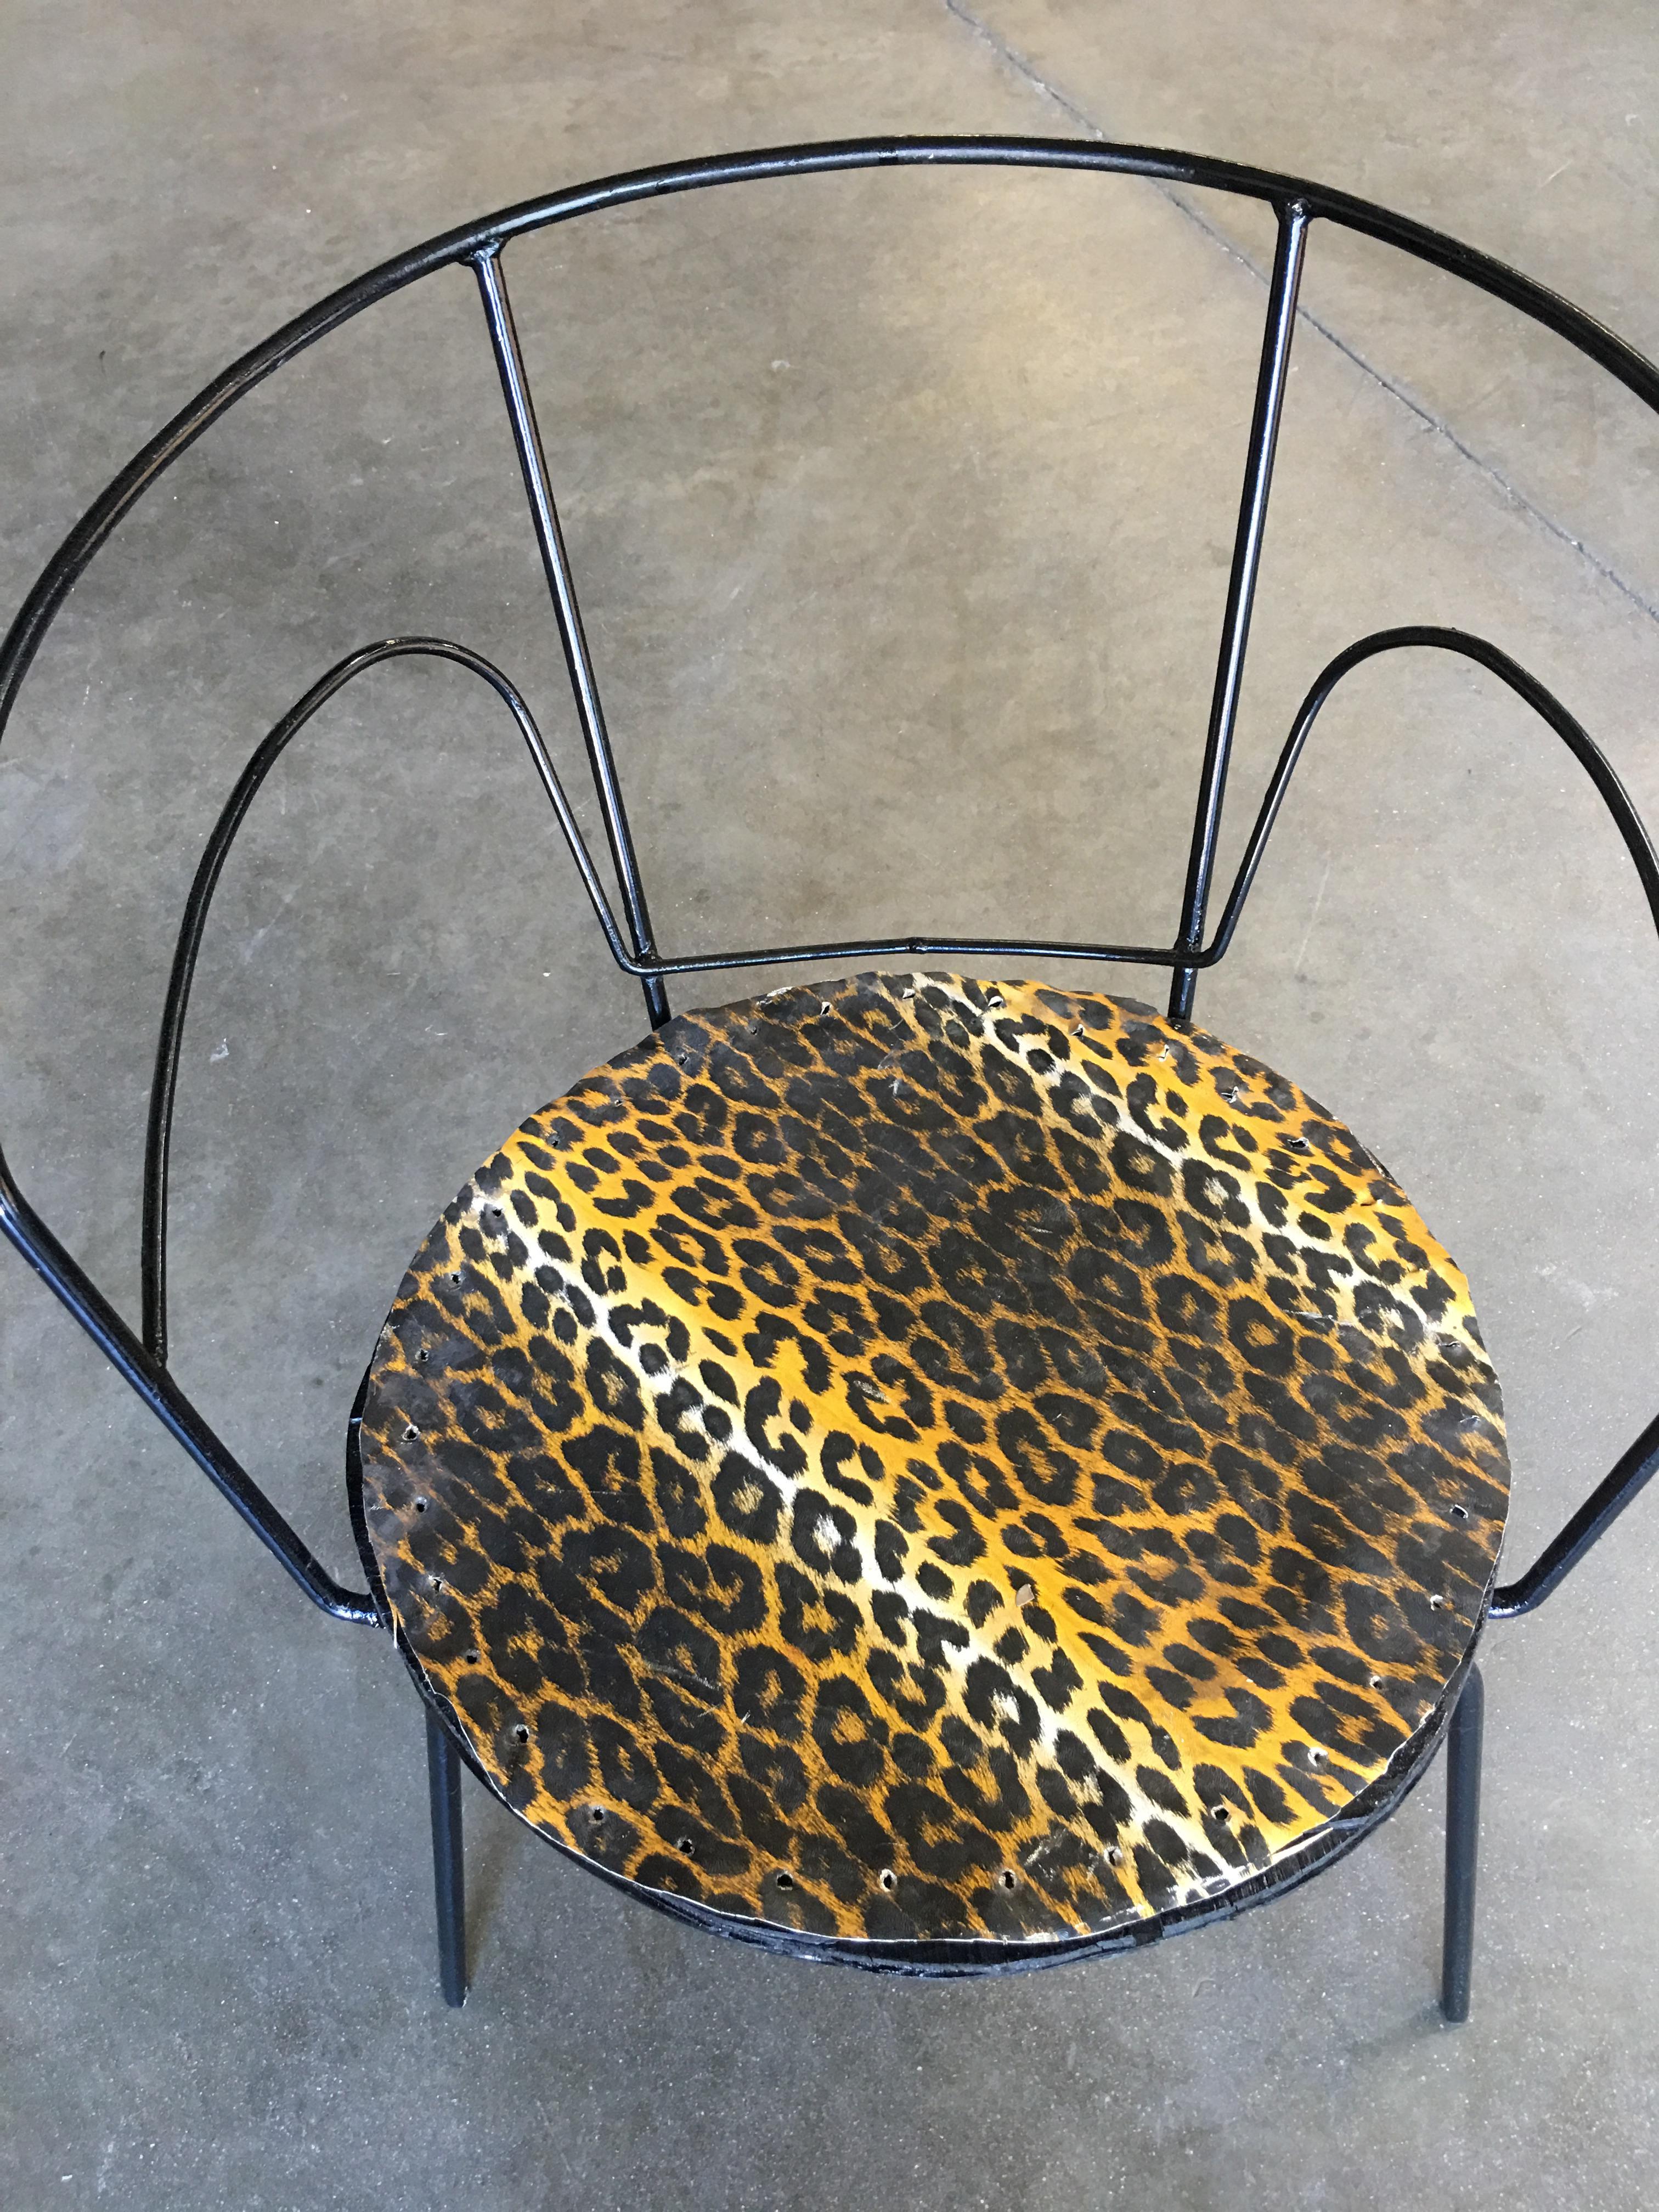 Mid-20th Century Atomic Age Iron Wire Side Armchair w/ Leopard Print Seat, Pair For Sale